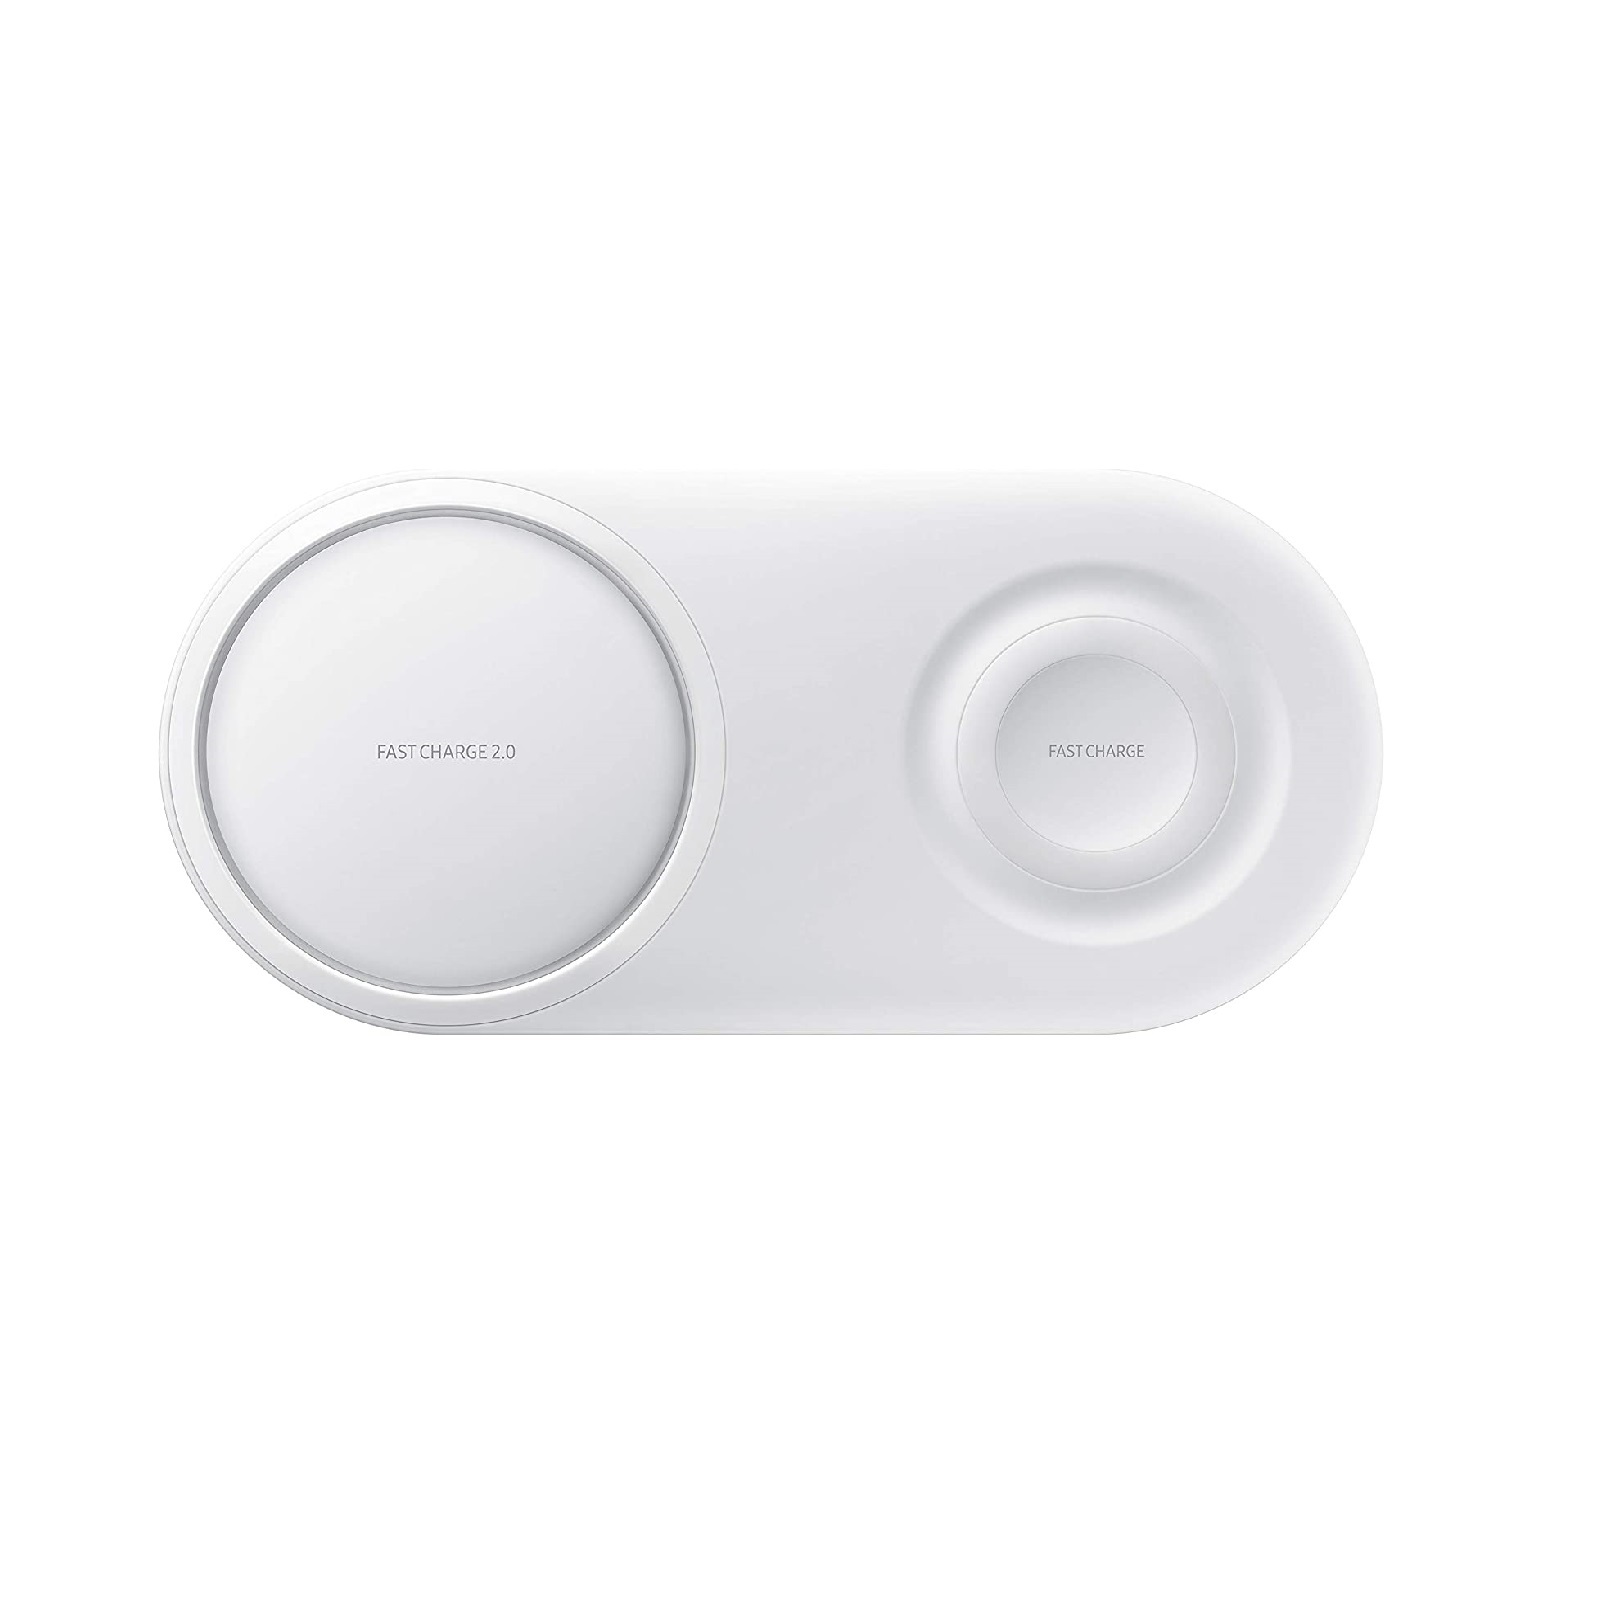 Samsung Wireless Charger Duo Pad White [Brand New]